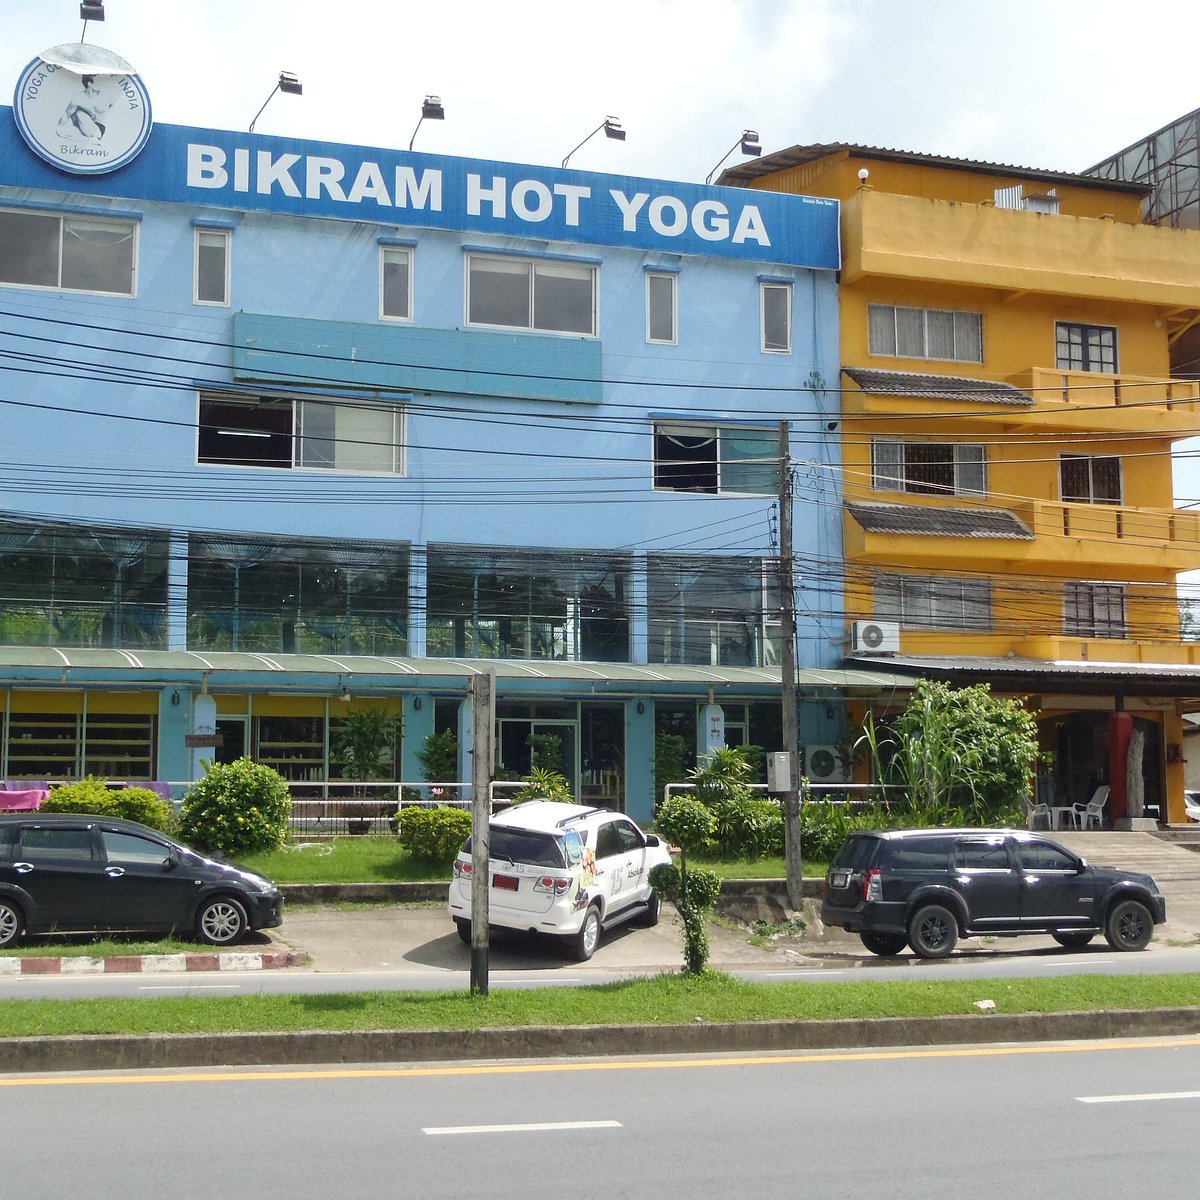 Bikram Yoga (Hot Yoga) Retreats in Phuket are Excellent for Your